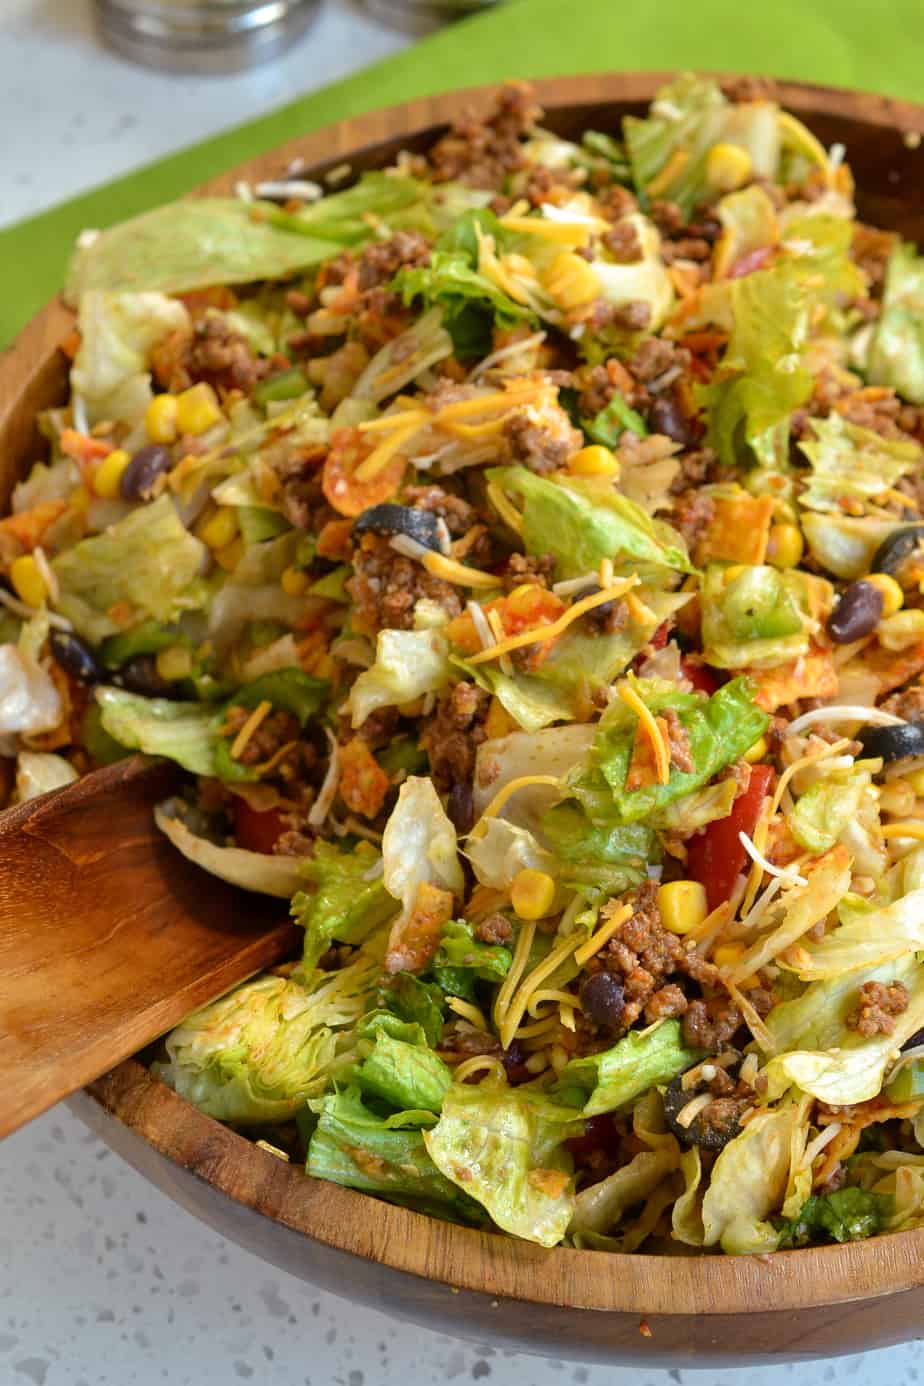 Doritos Taco Salad is a delectable combination of iceberg lettuce, tomatoes, green peppers, black beans, corn, black olives, seasoned ground beef, shredded cheddar jack cheese, and crunchy Doritos in a homemade tangy sweet Catalina dressing